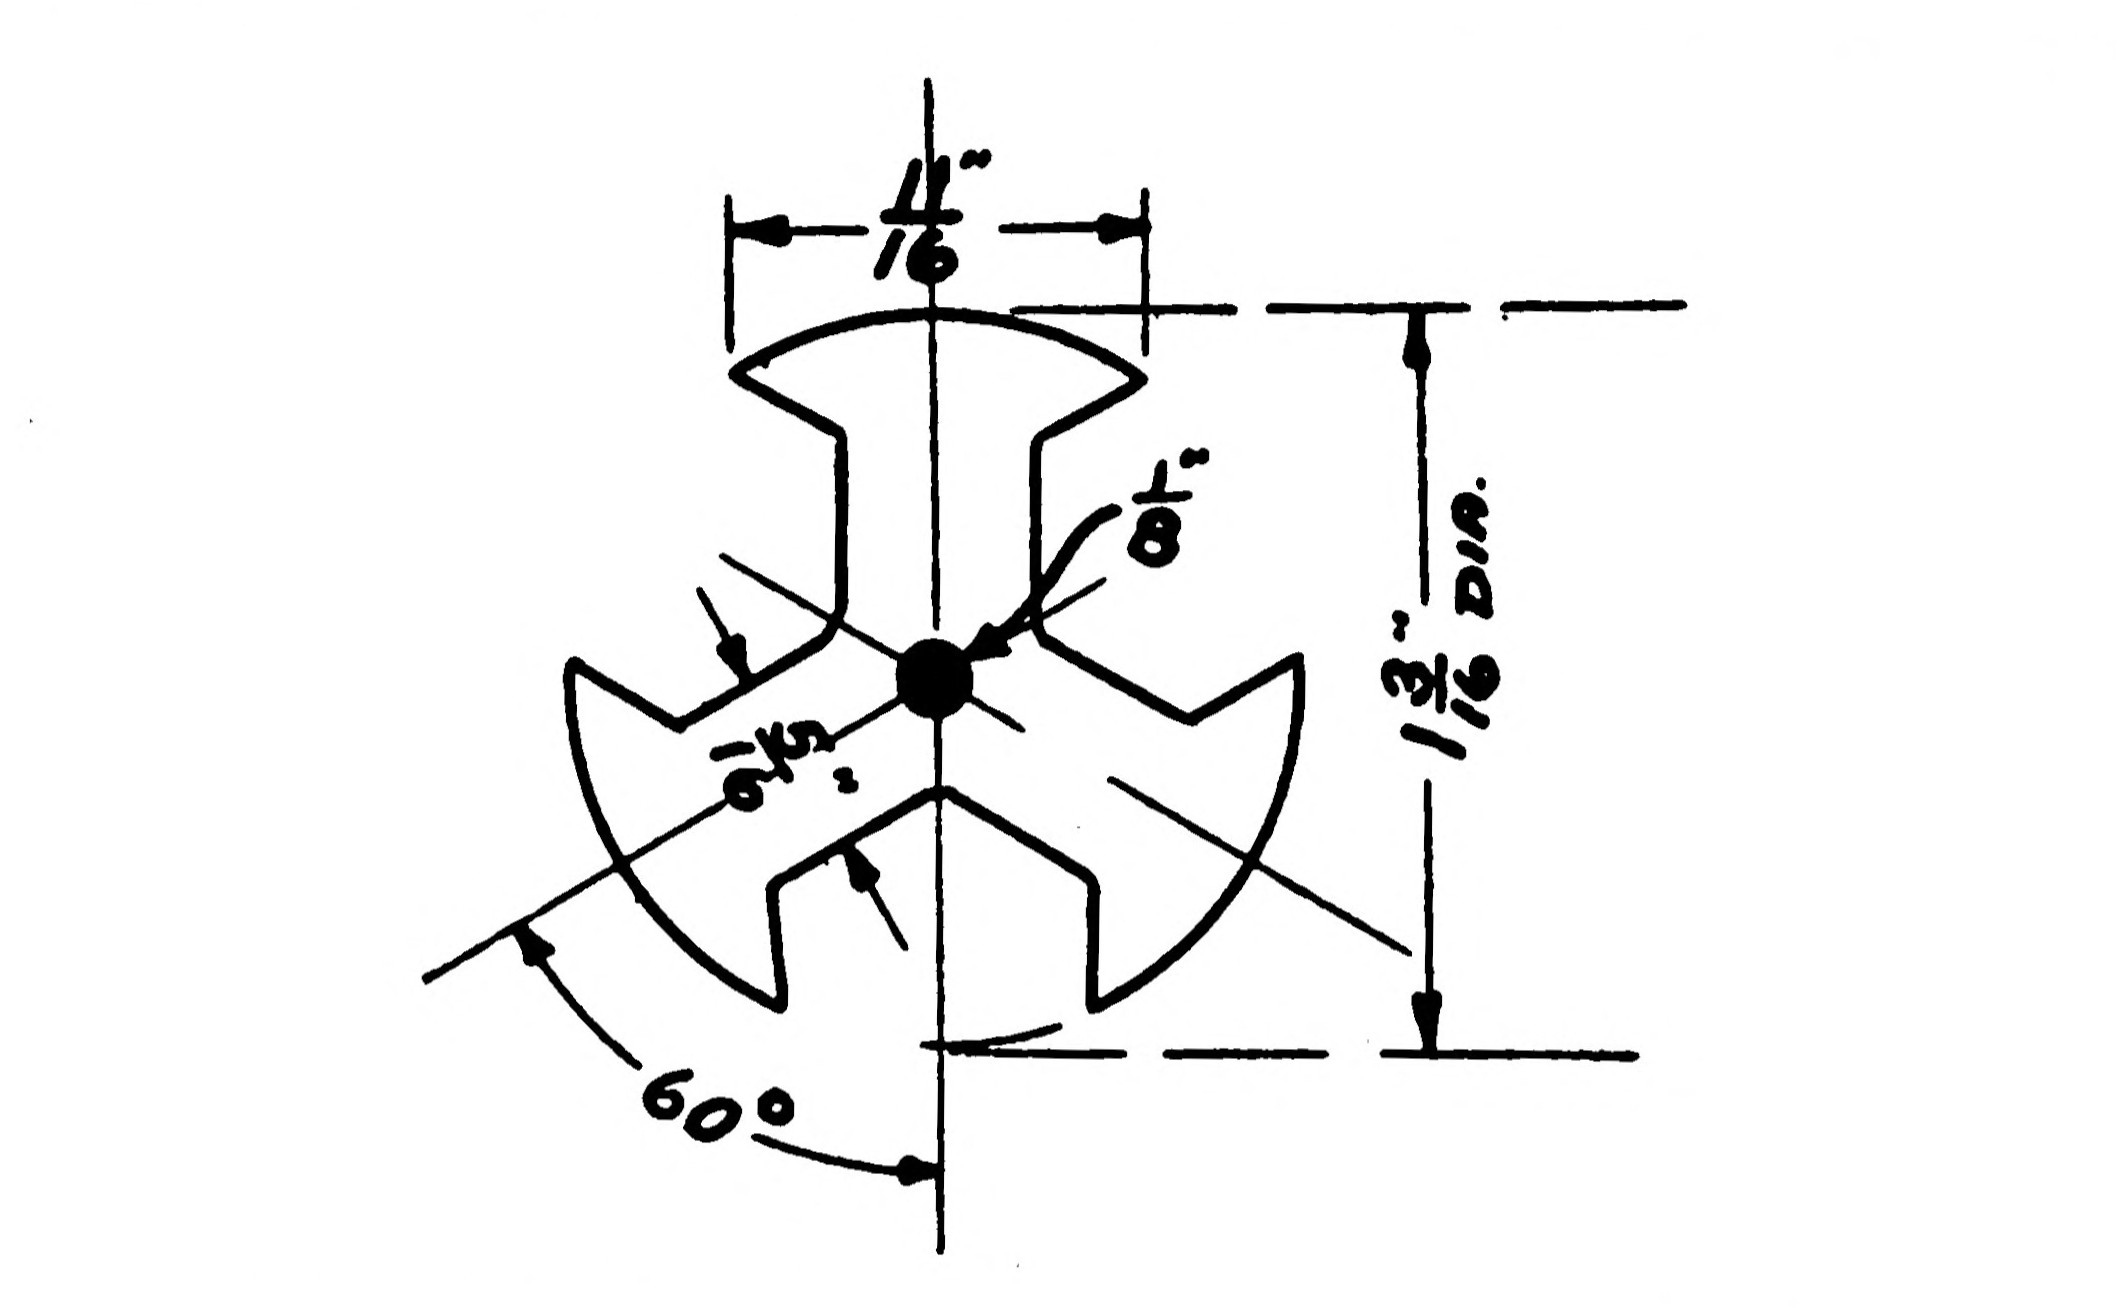 FIG. 136.—Details of the Armature Lamination.